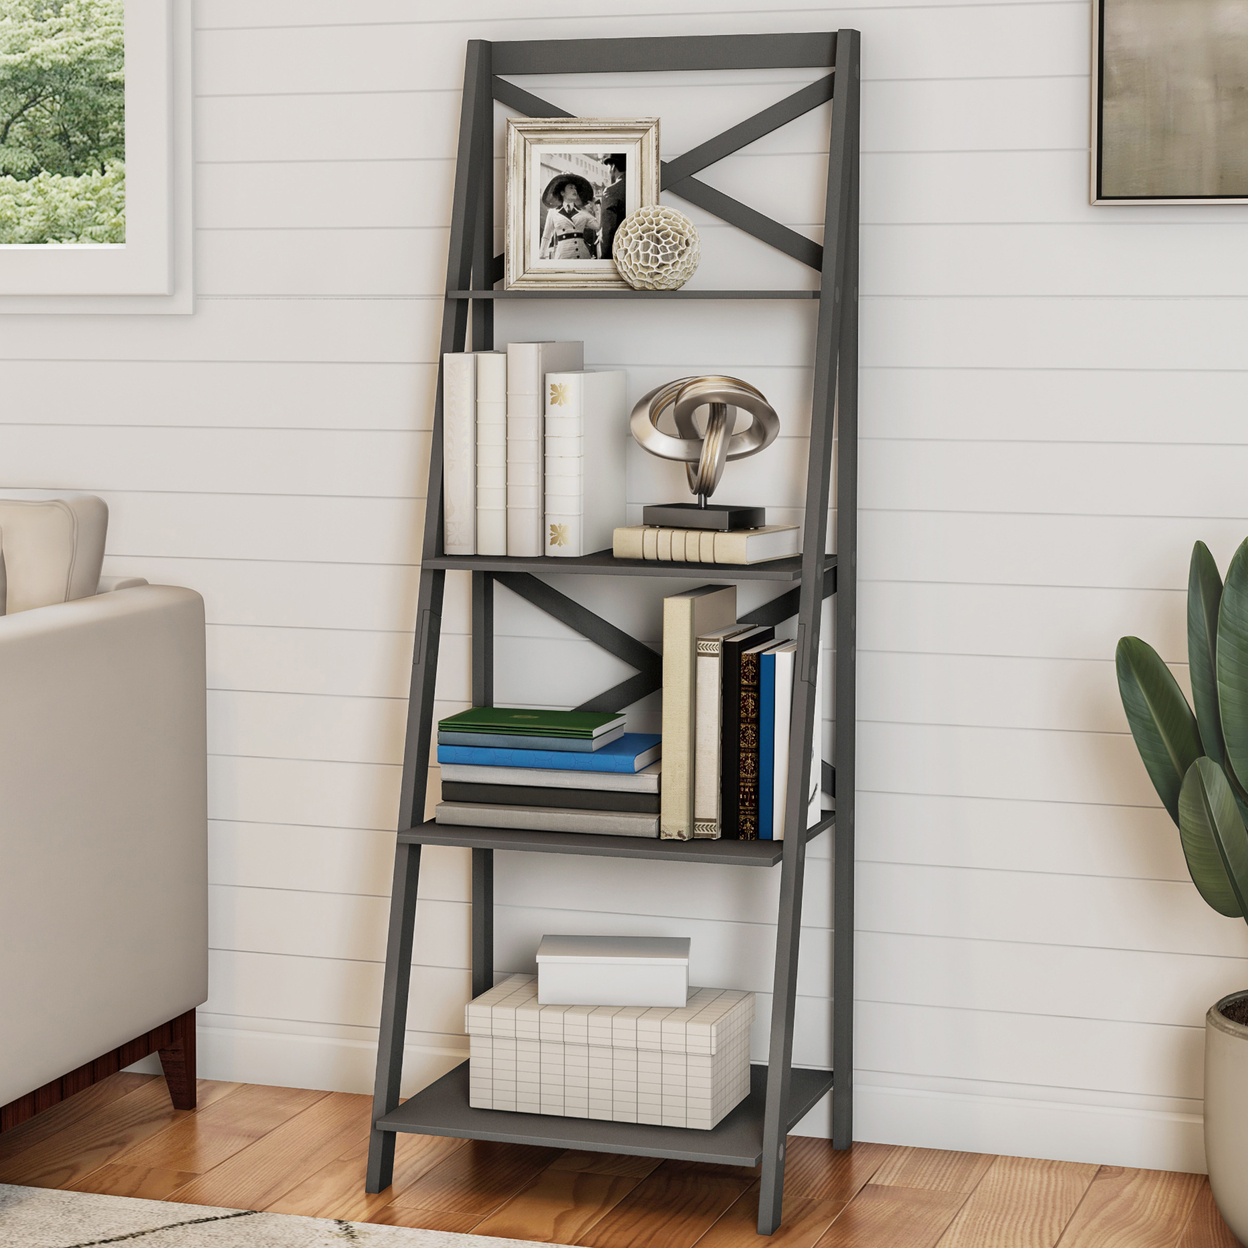 Bookcase Home Decor Display 4 Shelf Wooden Ladder Style 56 In Tall Gray